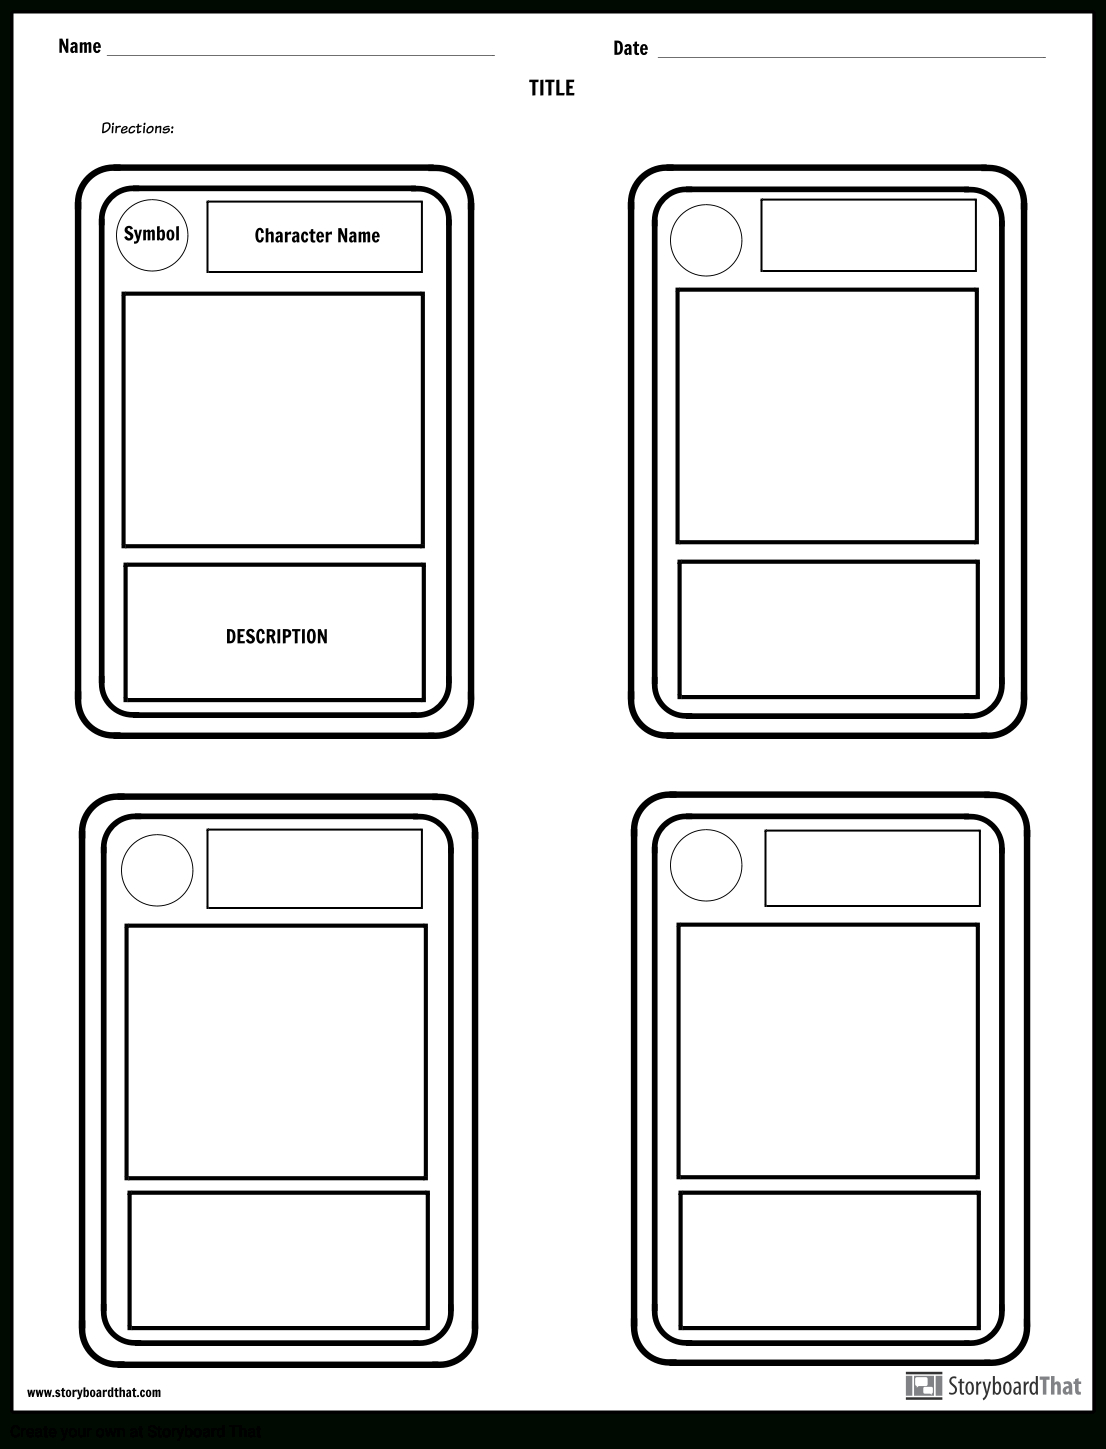 Trading Cards Template – Karan.ald2014 Intended For Trading Card Template Word